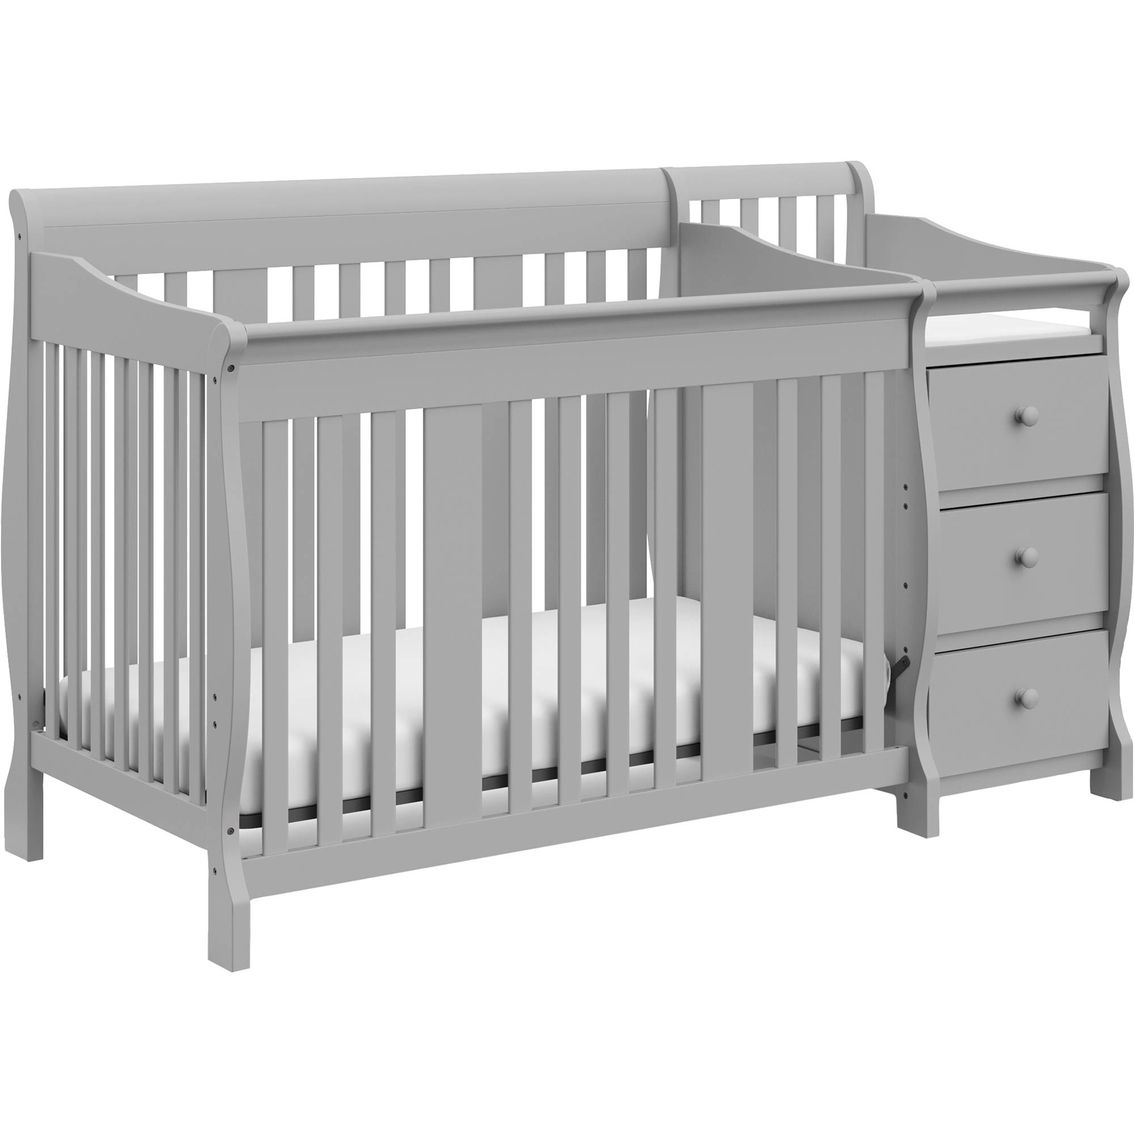 Storkcraft Portofino 4 in 1 Convertible Crib and Changer - Image 1 of 9